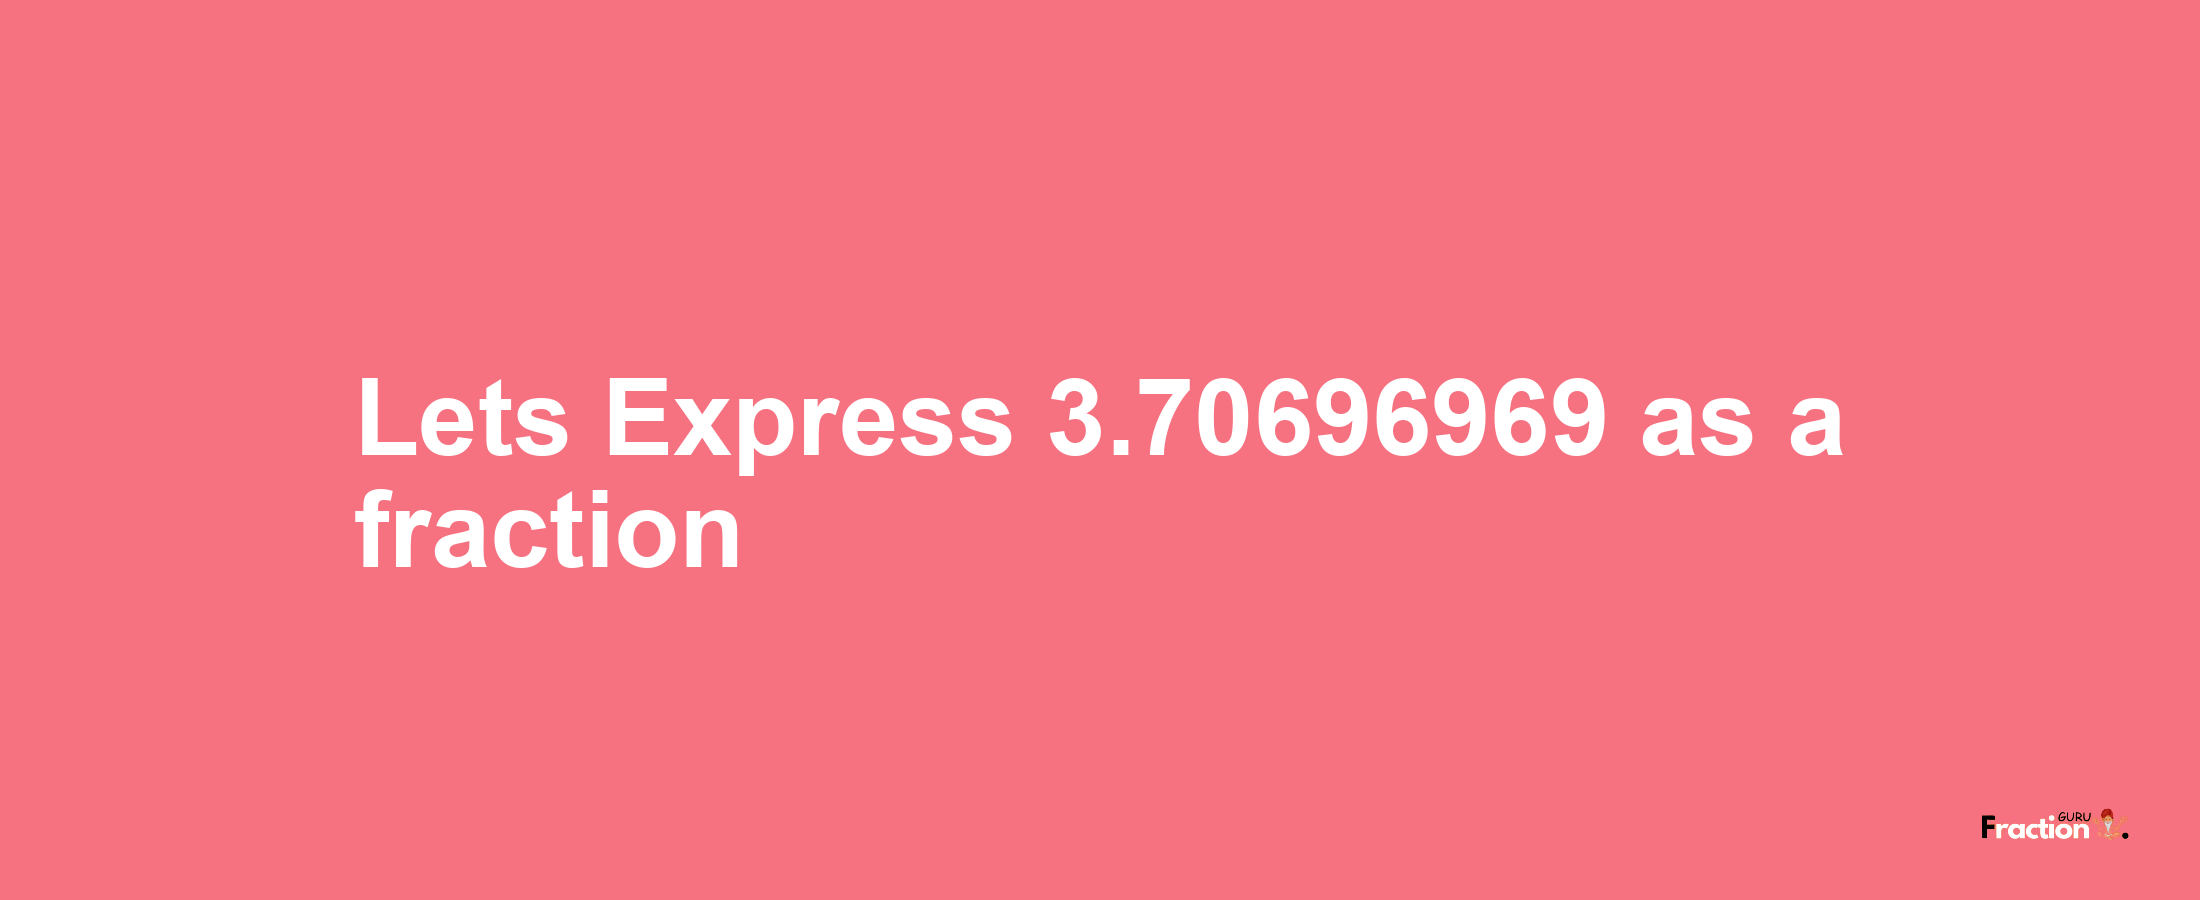 Lets Express 3.70696969 as afraction